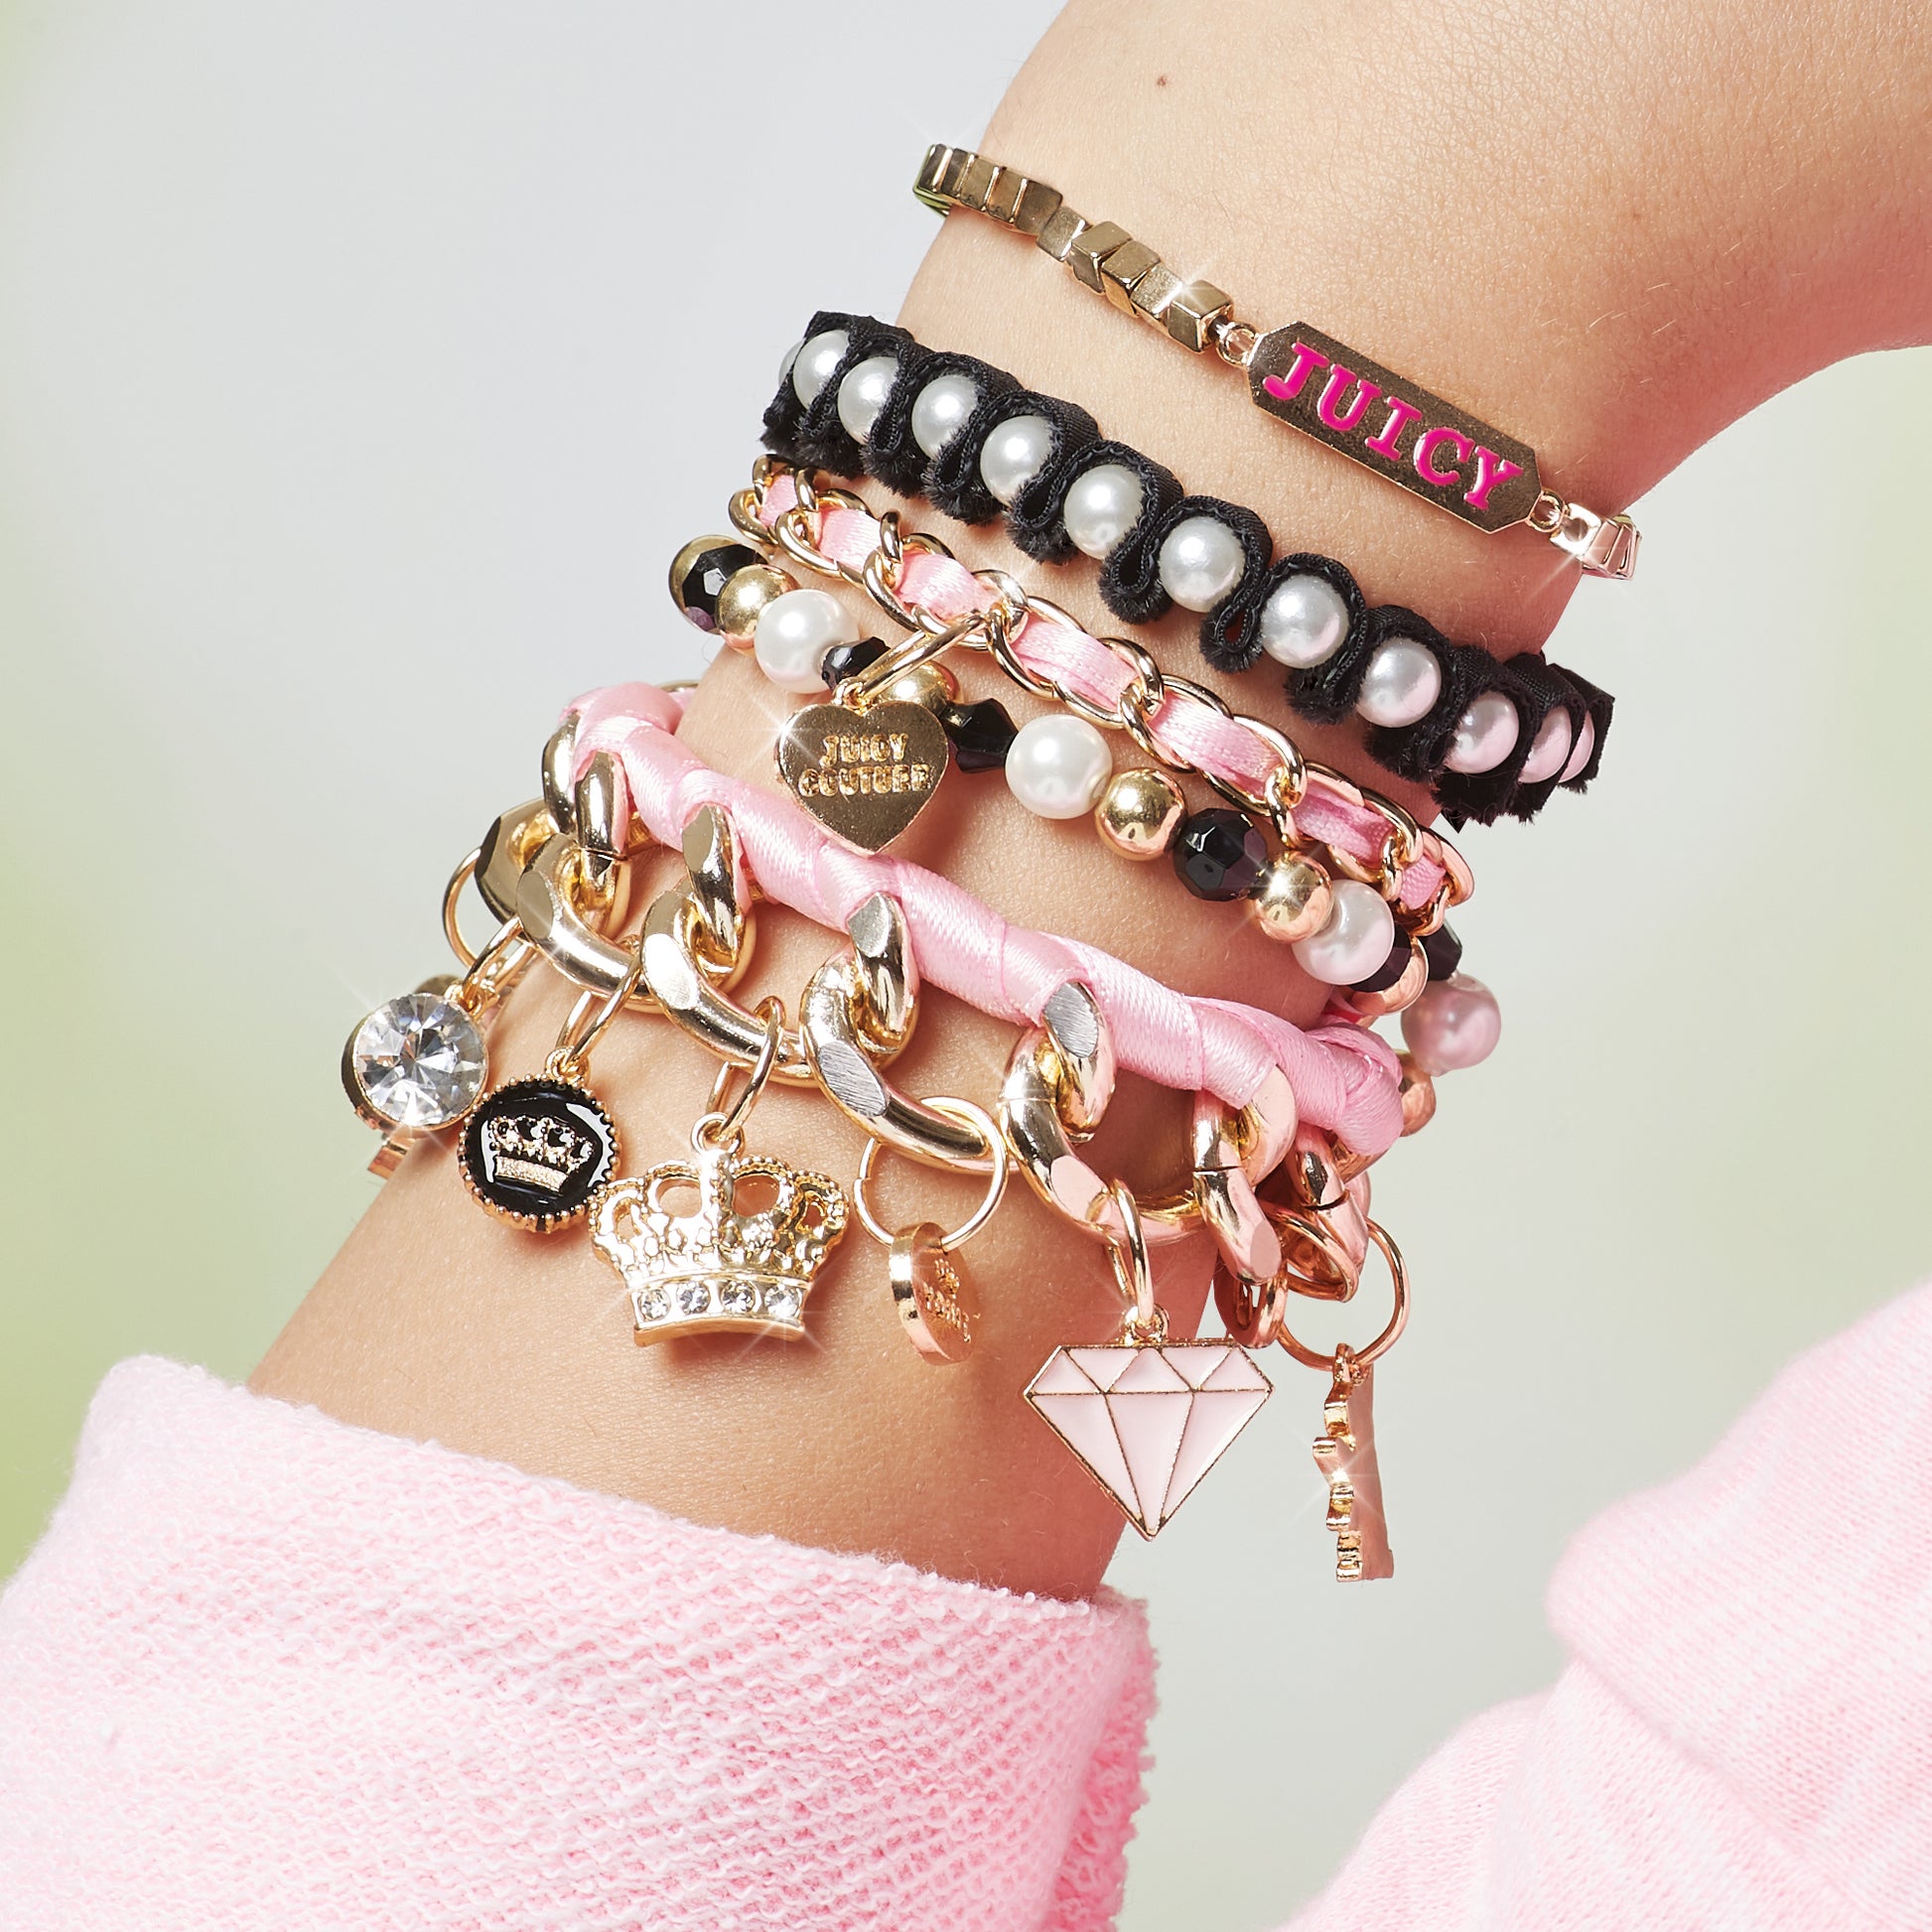 Juicy Couture, Jewelry, Juicy Couture Bracelet